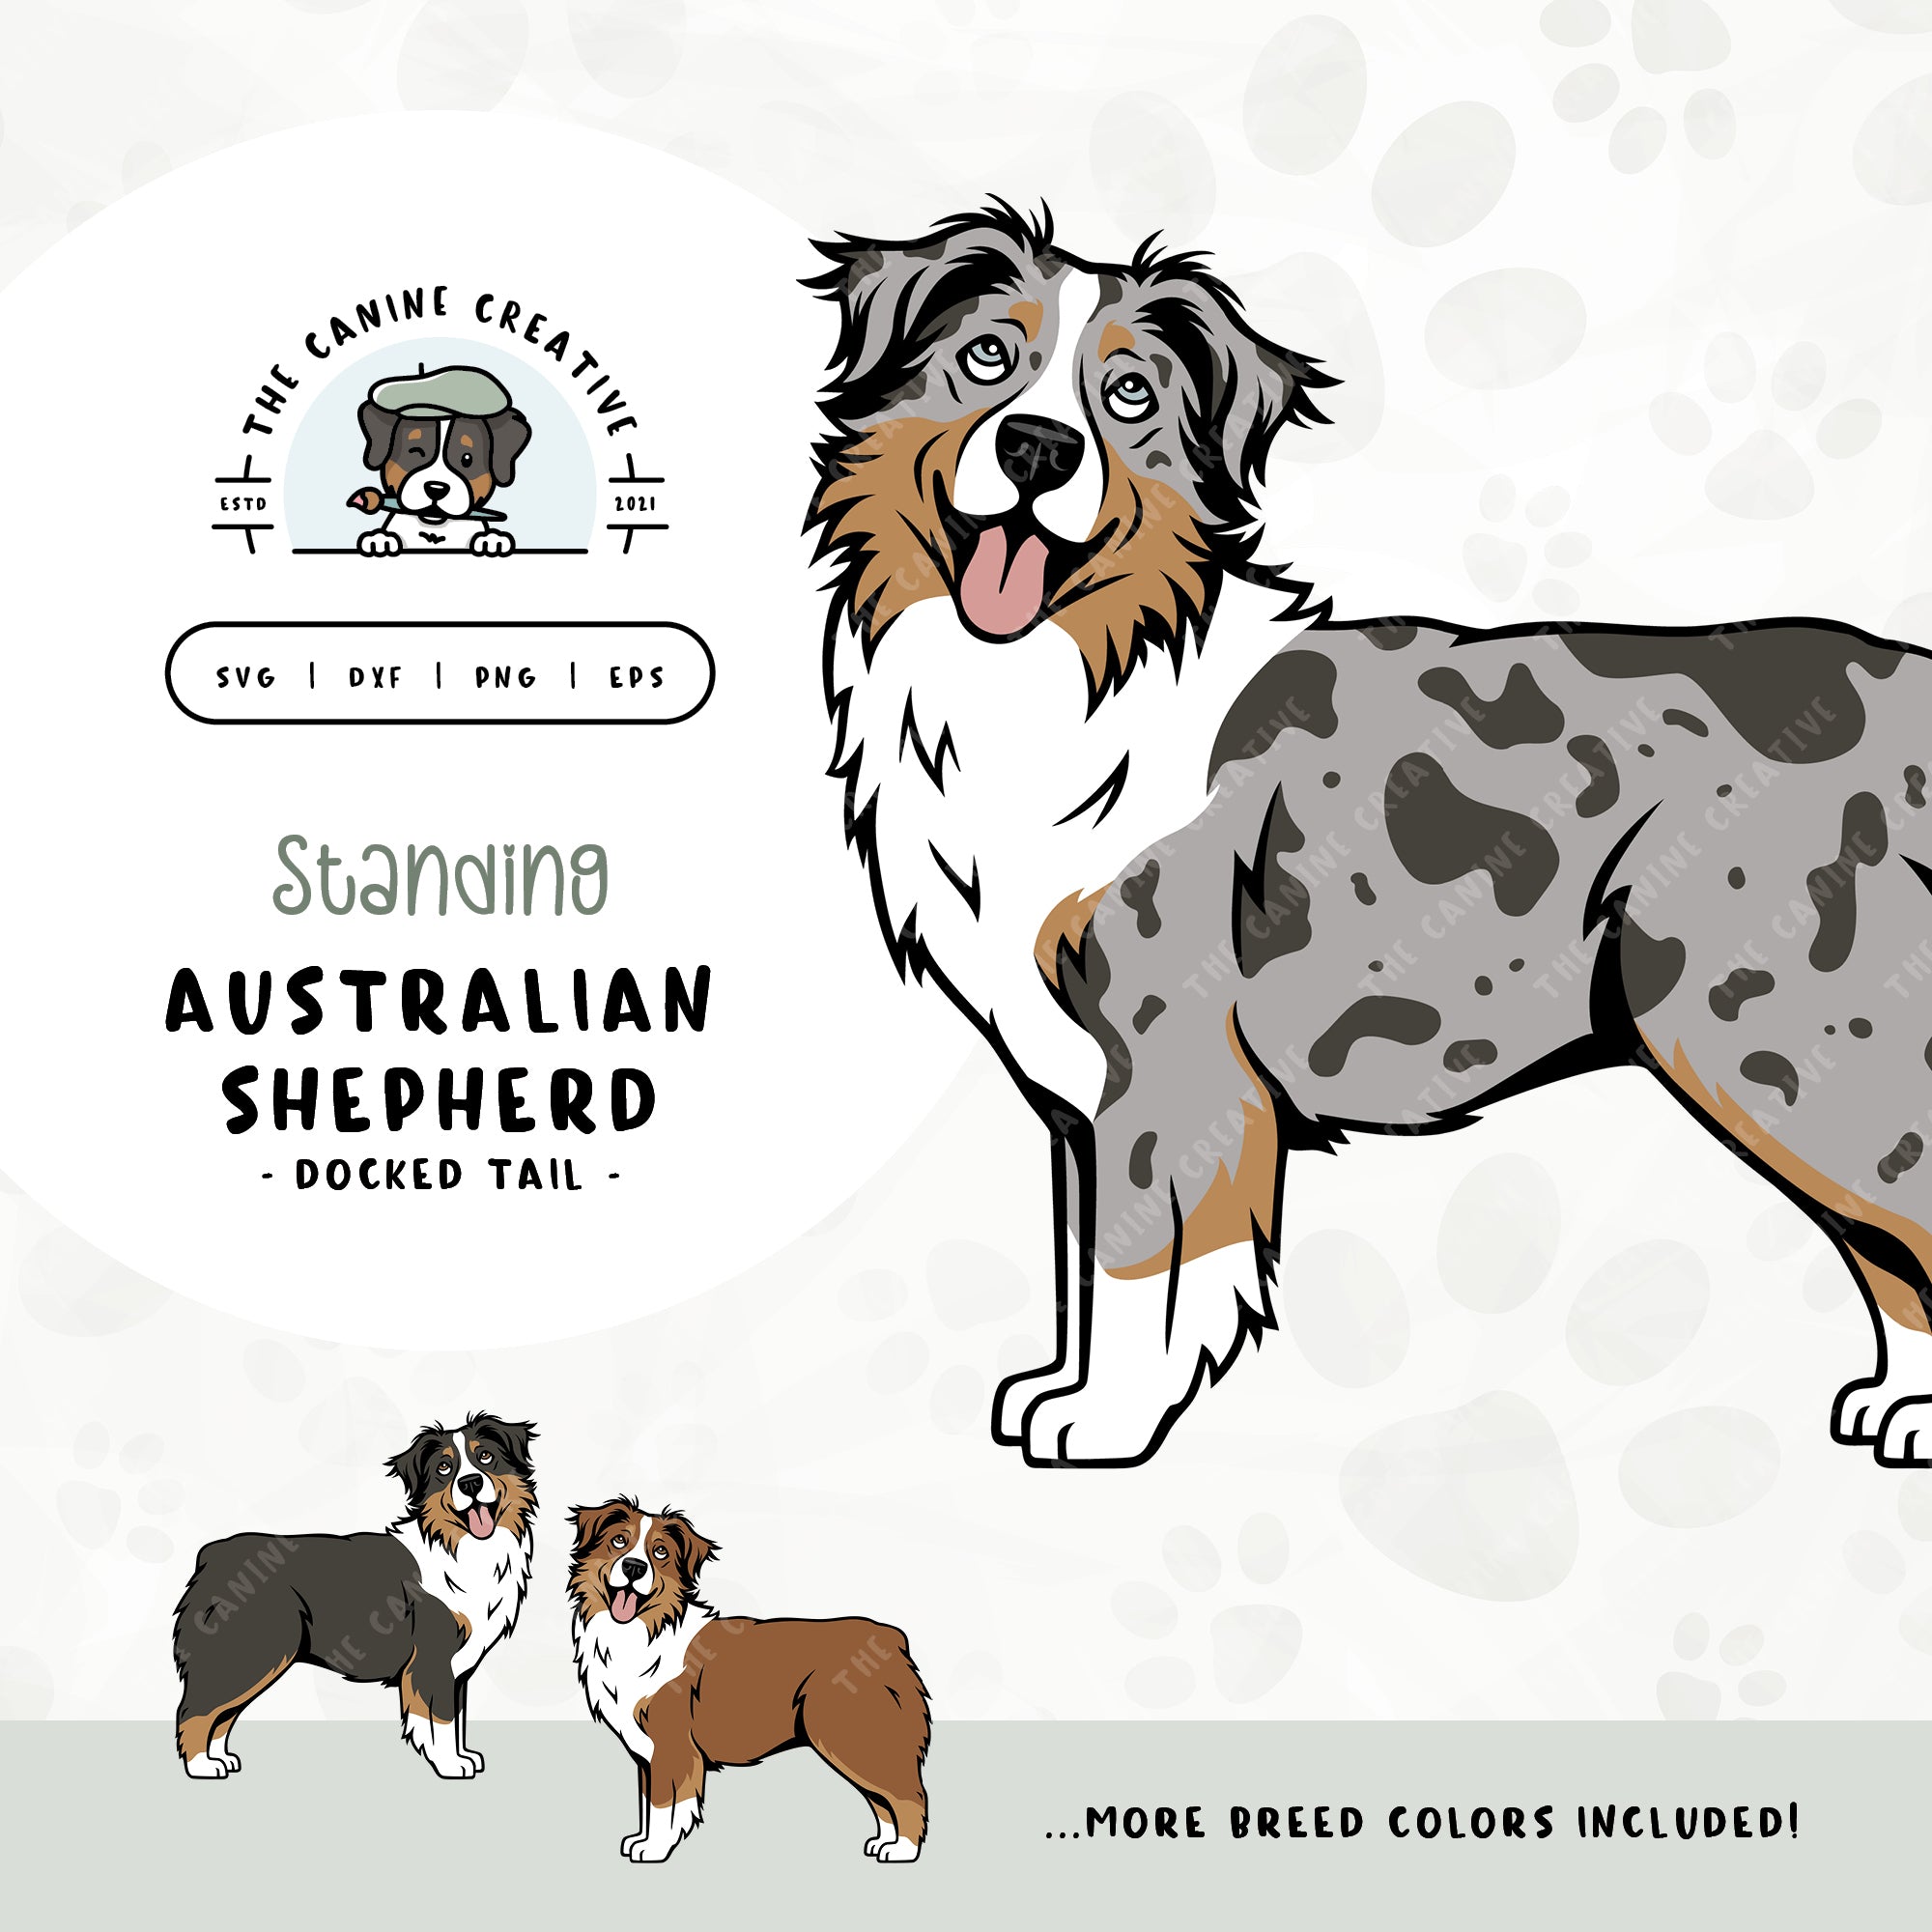 This standing dog design features an Australian Shepherd with a docked tail. File formats include: SVG, DXF, PNG, and EPS.